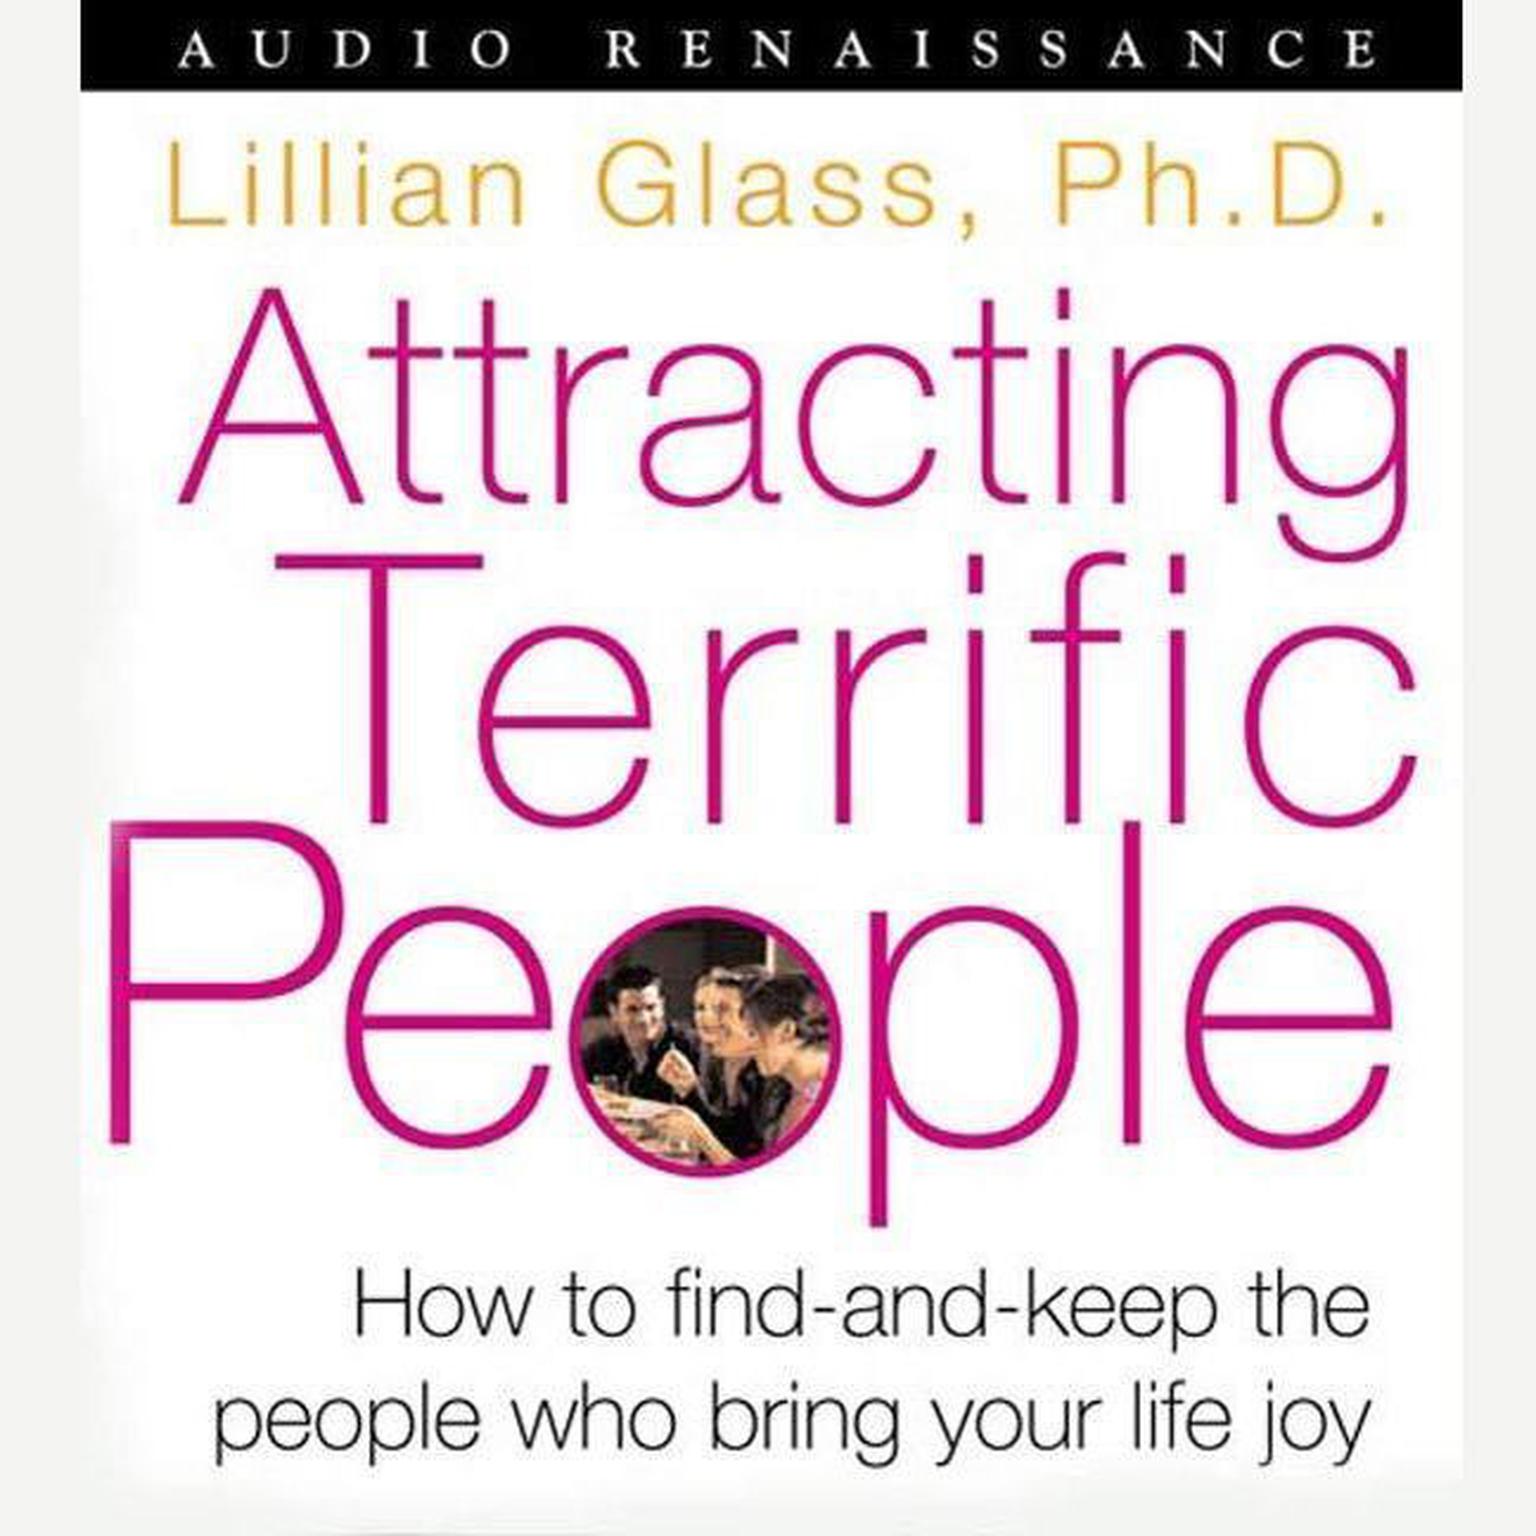 Attracting Terrific People (Abridged): How To Find - And Keep - The People Who Bring Your Life Joy Audiobook, by Lillian Glass